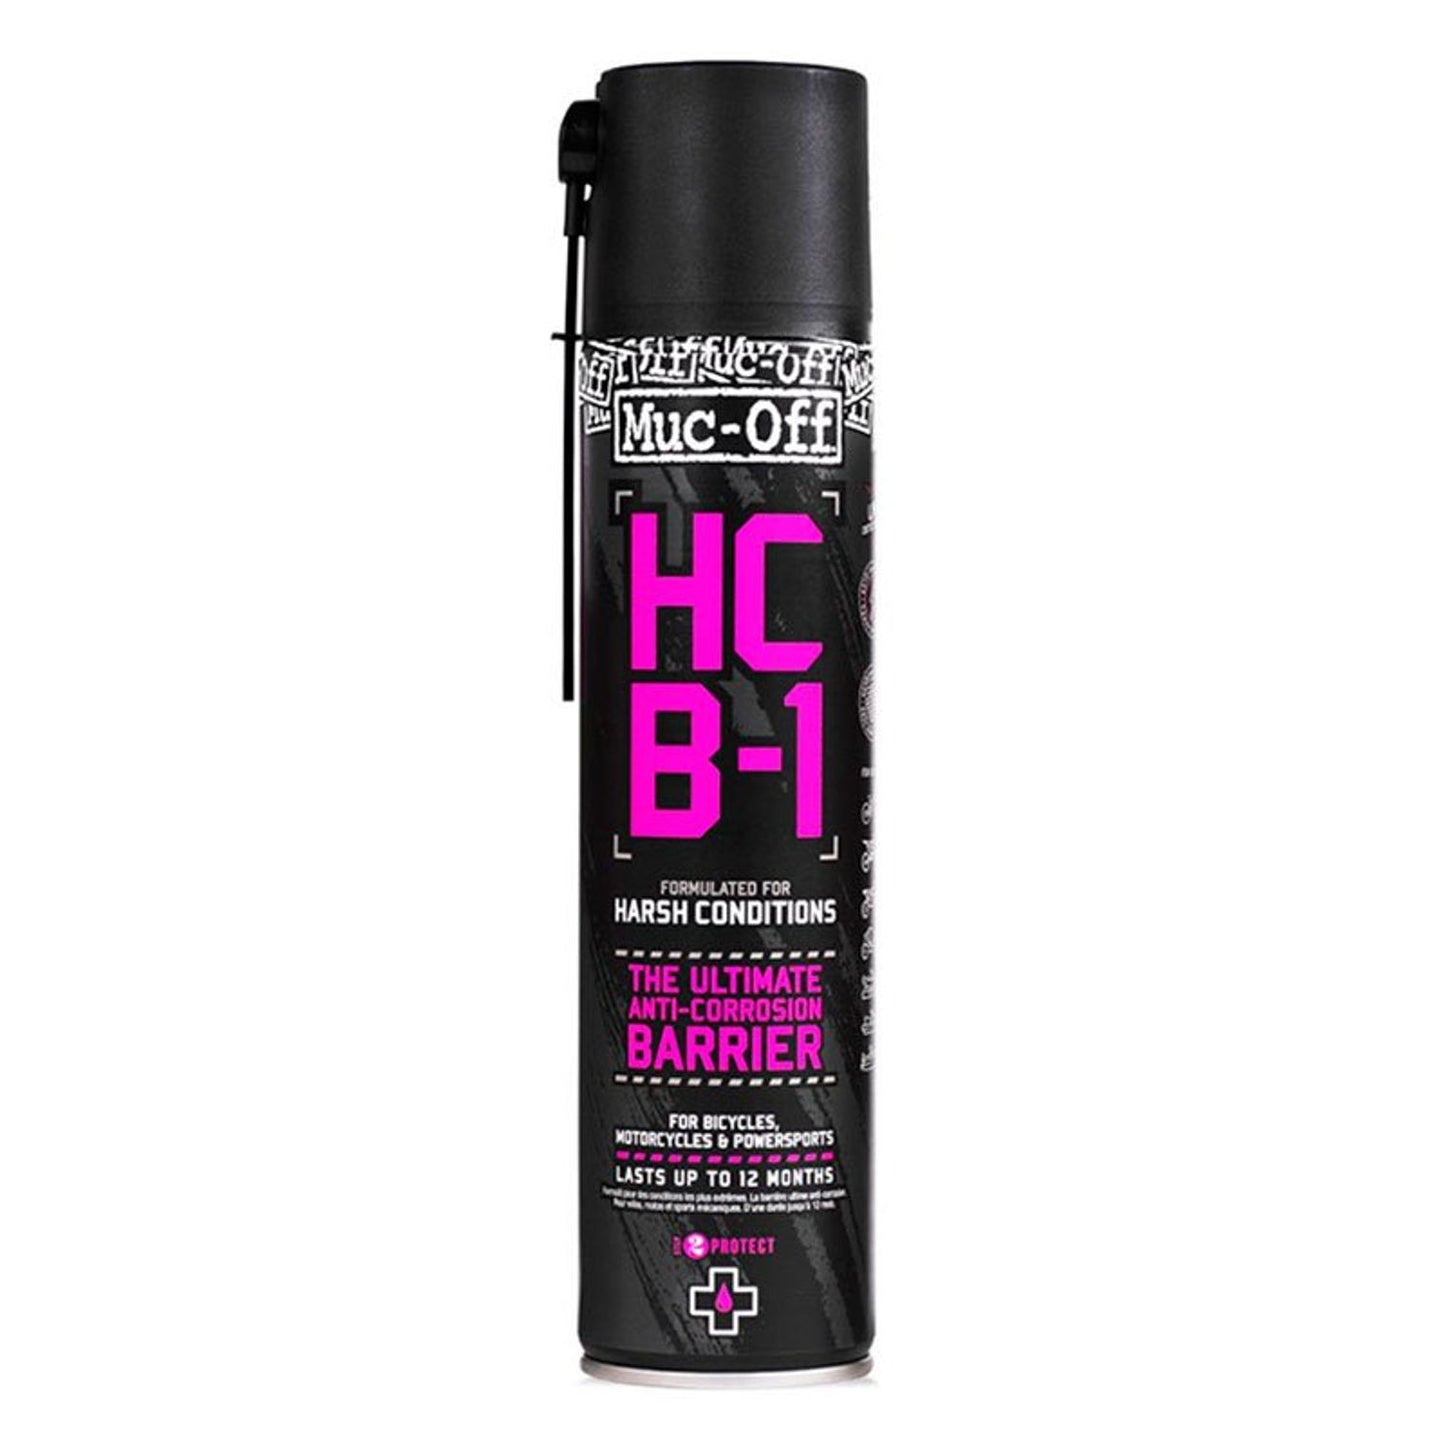 Spray protector HCB-1 HARSH CONDITION BARRIER 400ml MUC-OFF